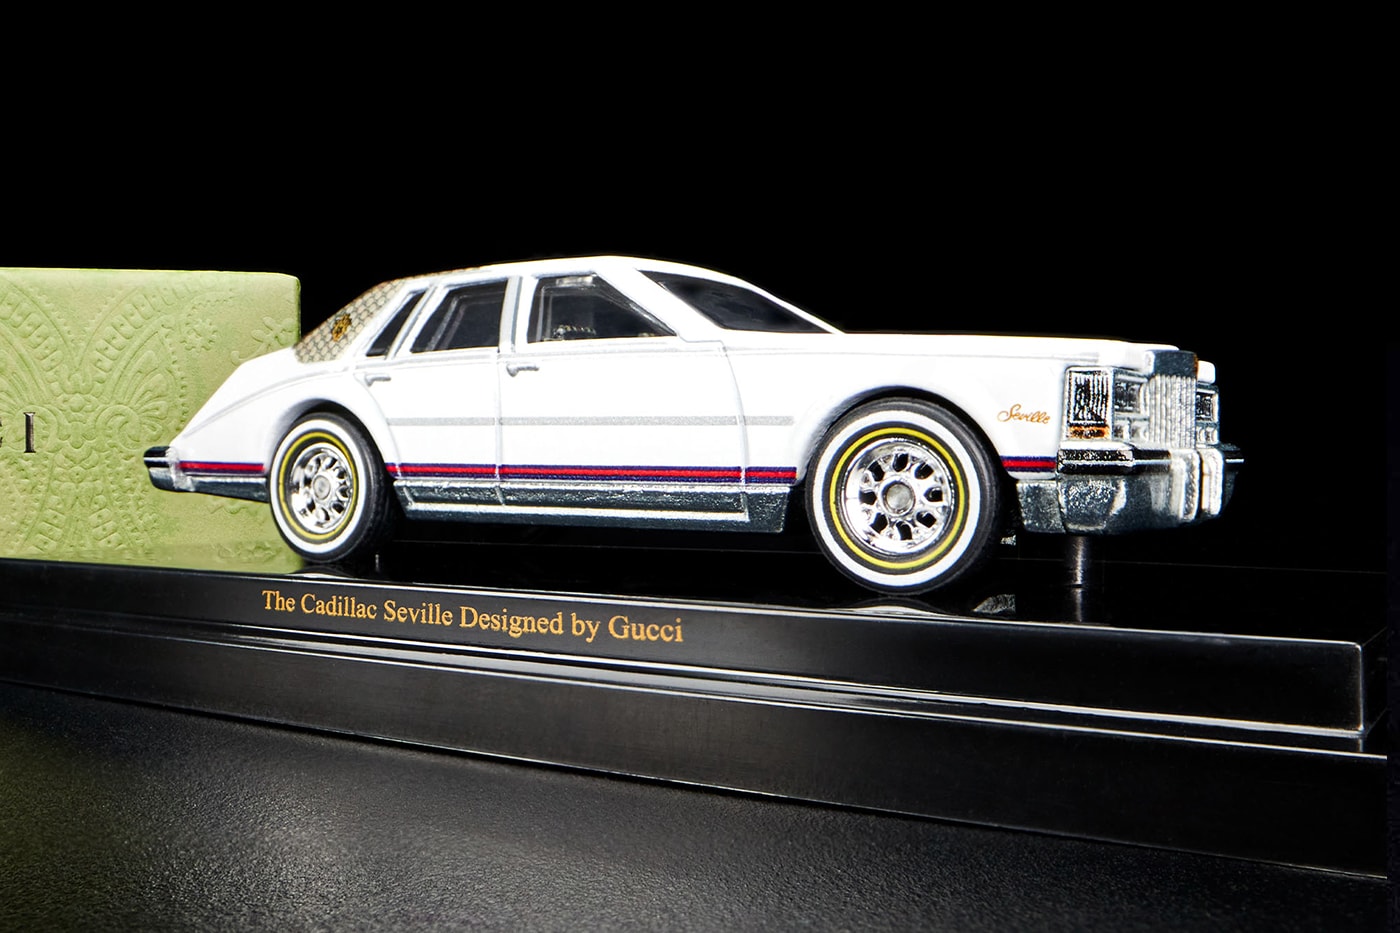 Mattel Creations Inc Hot wheels collectible gucci 100th anniversary limited edition cadillac seville october 18 Italian detroit vinyl top gold radwood custom car 1:6 display case  release info